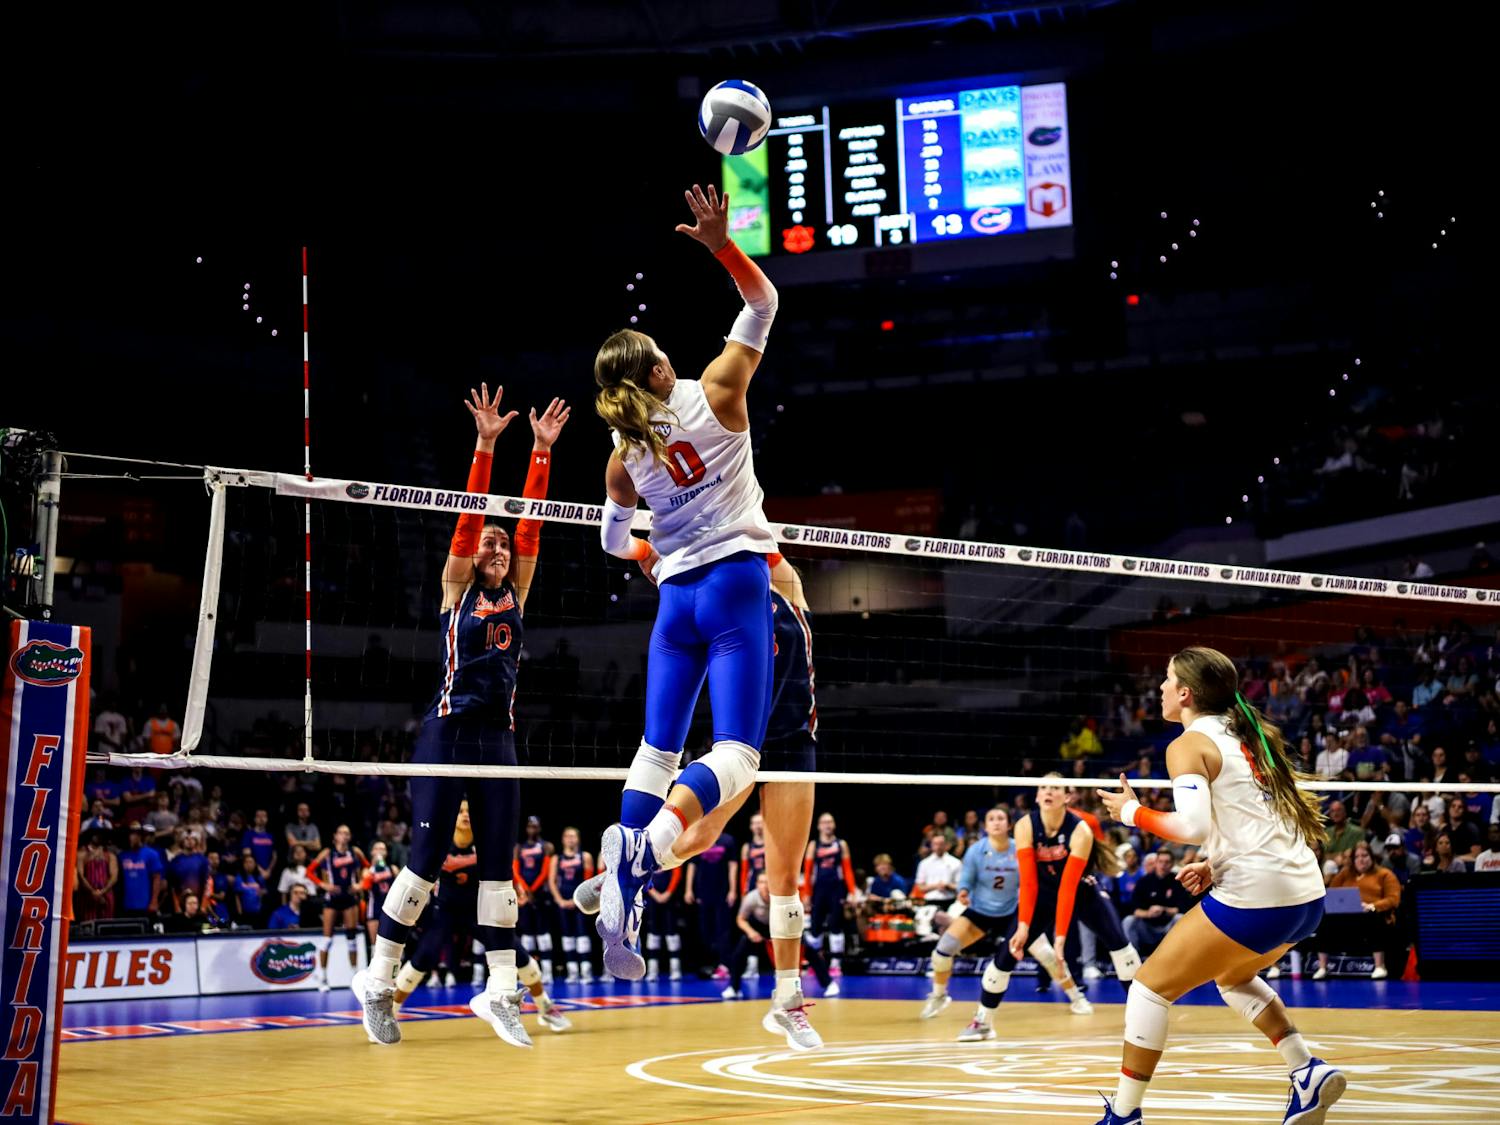 Florida outside hitter AC Fitzpatrick sets up to hit the ball in the Gators' 3-0 loss to the Auburn Tigers on Friday, Oct. 6, 2023